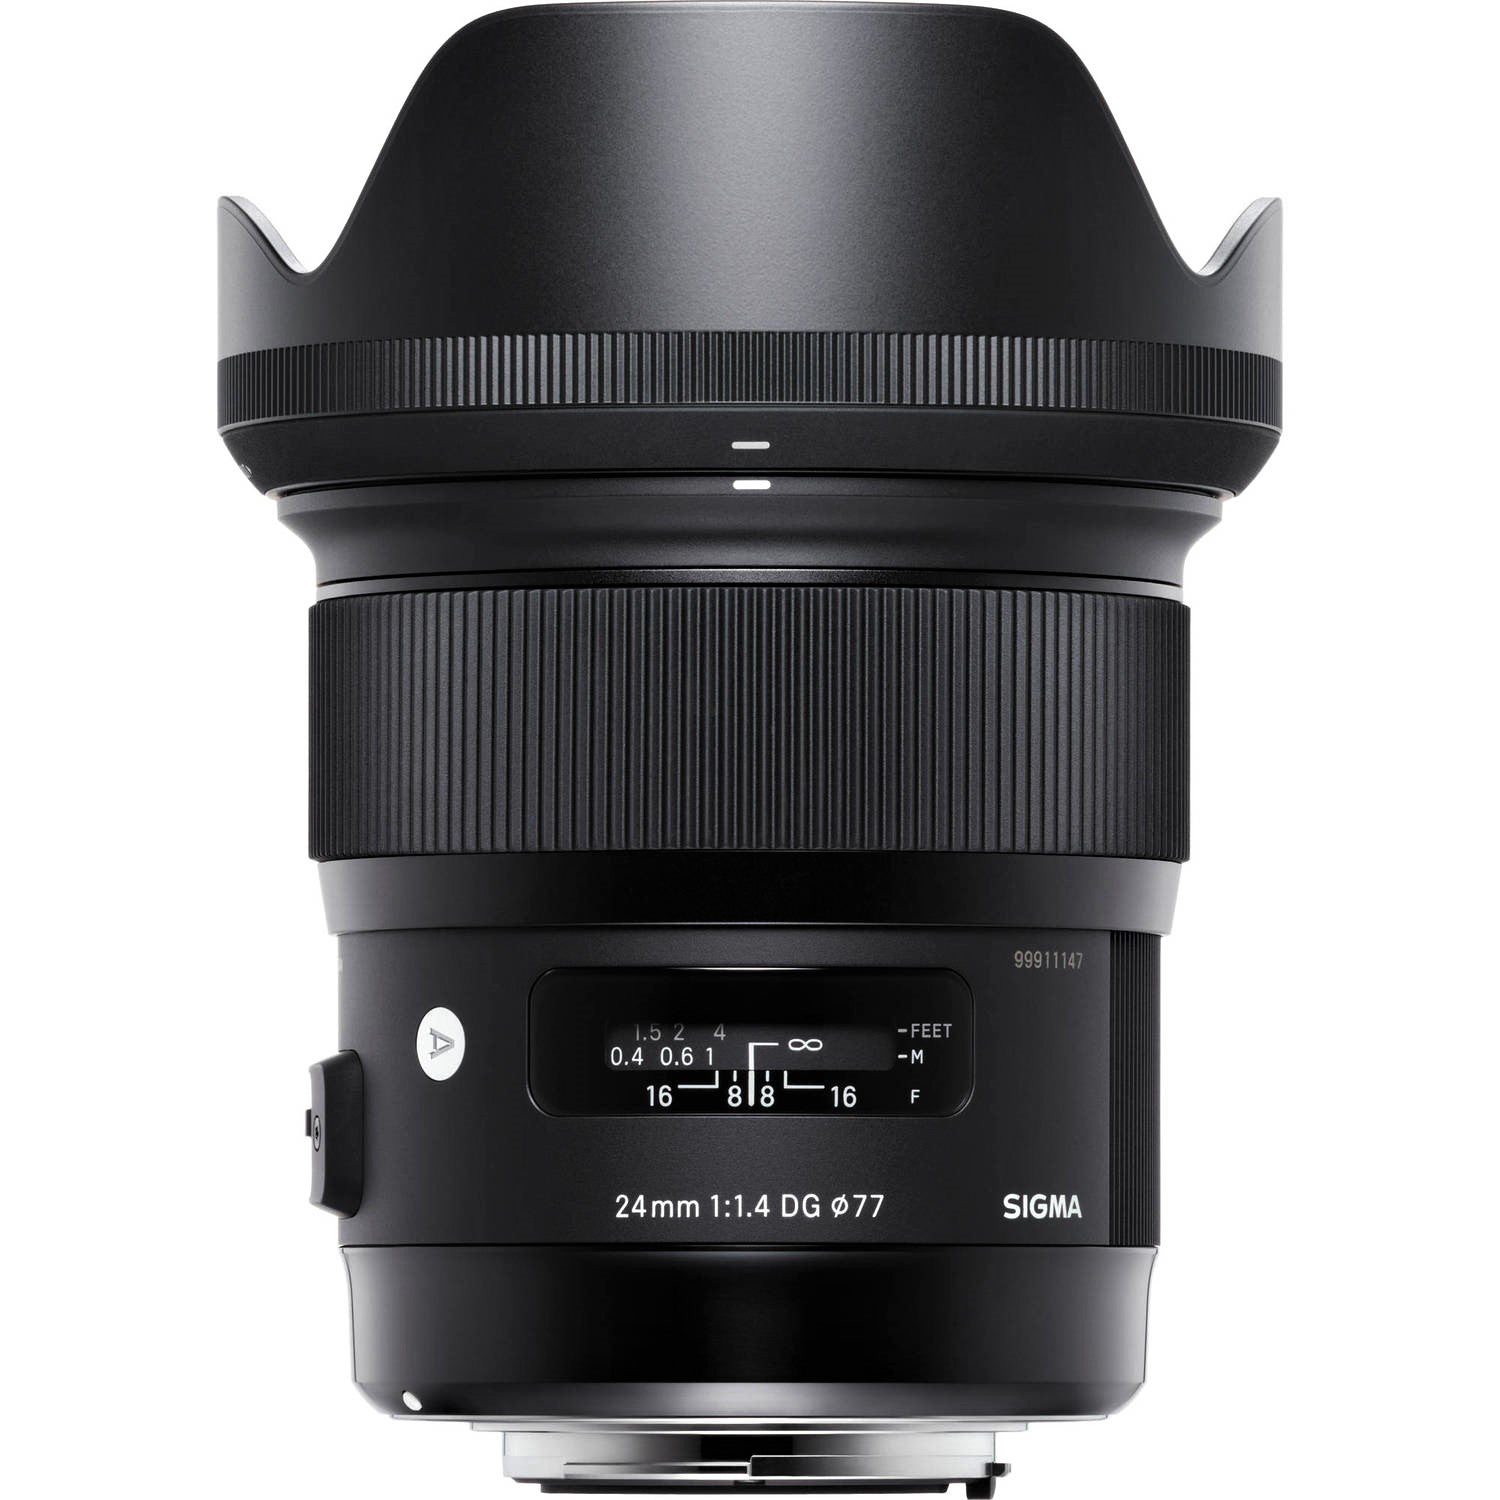 Sigma 24mm F1.4 DG HSM Art Lens for Canon EF with Attached Lens Hood on the Top